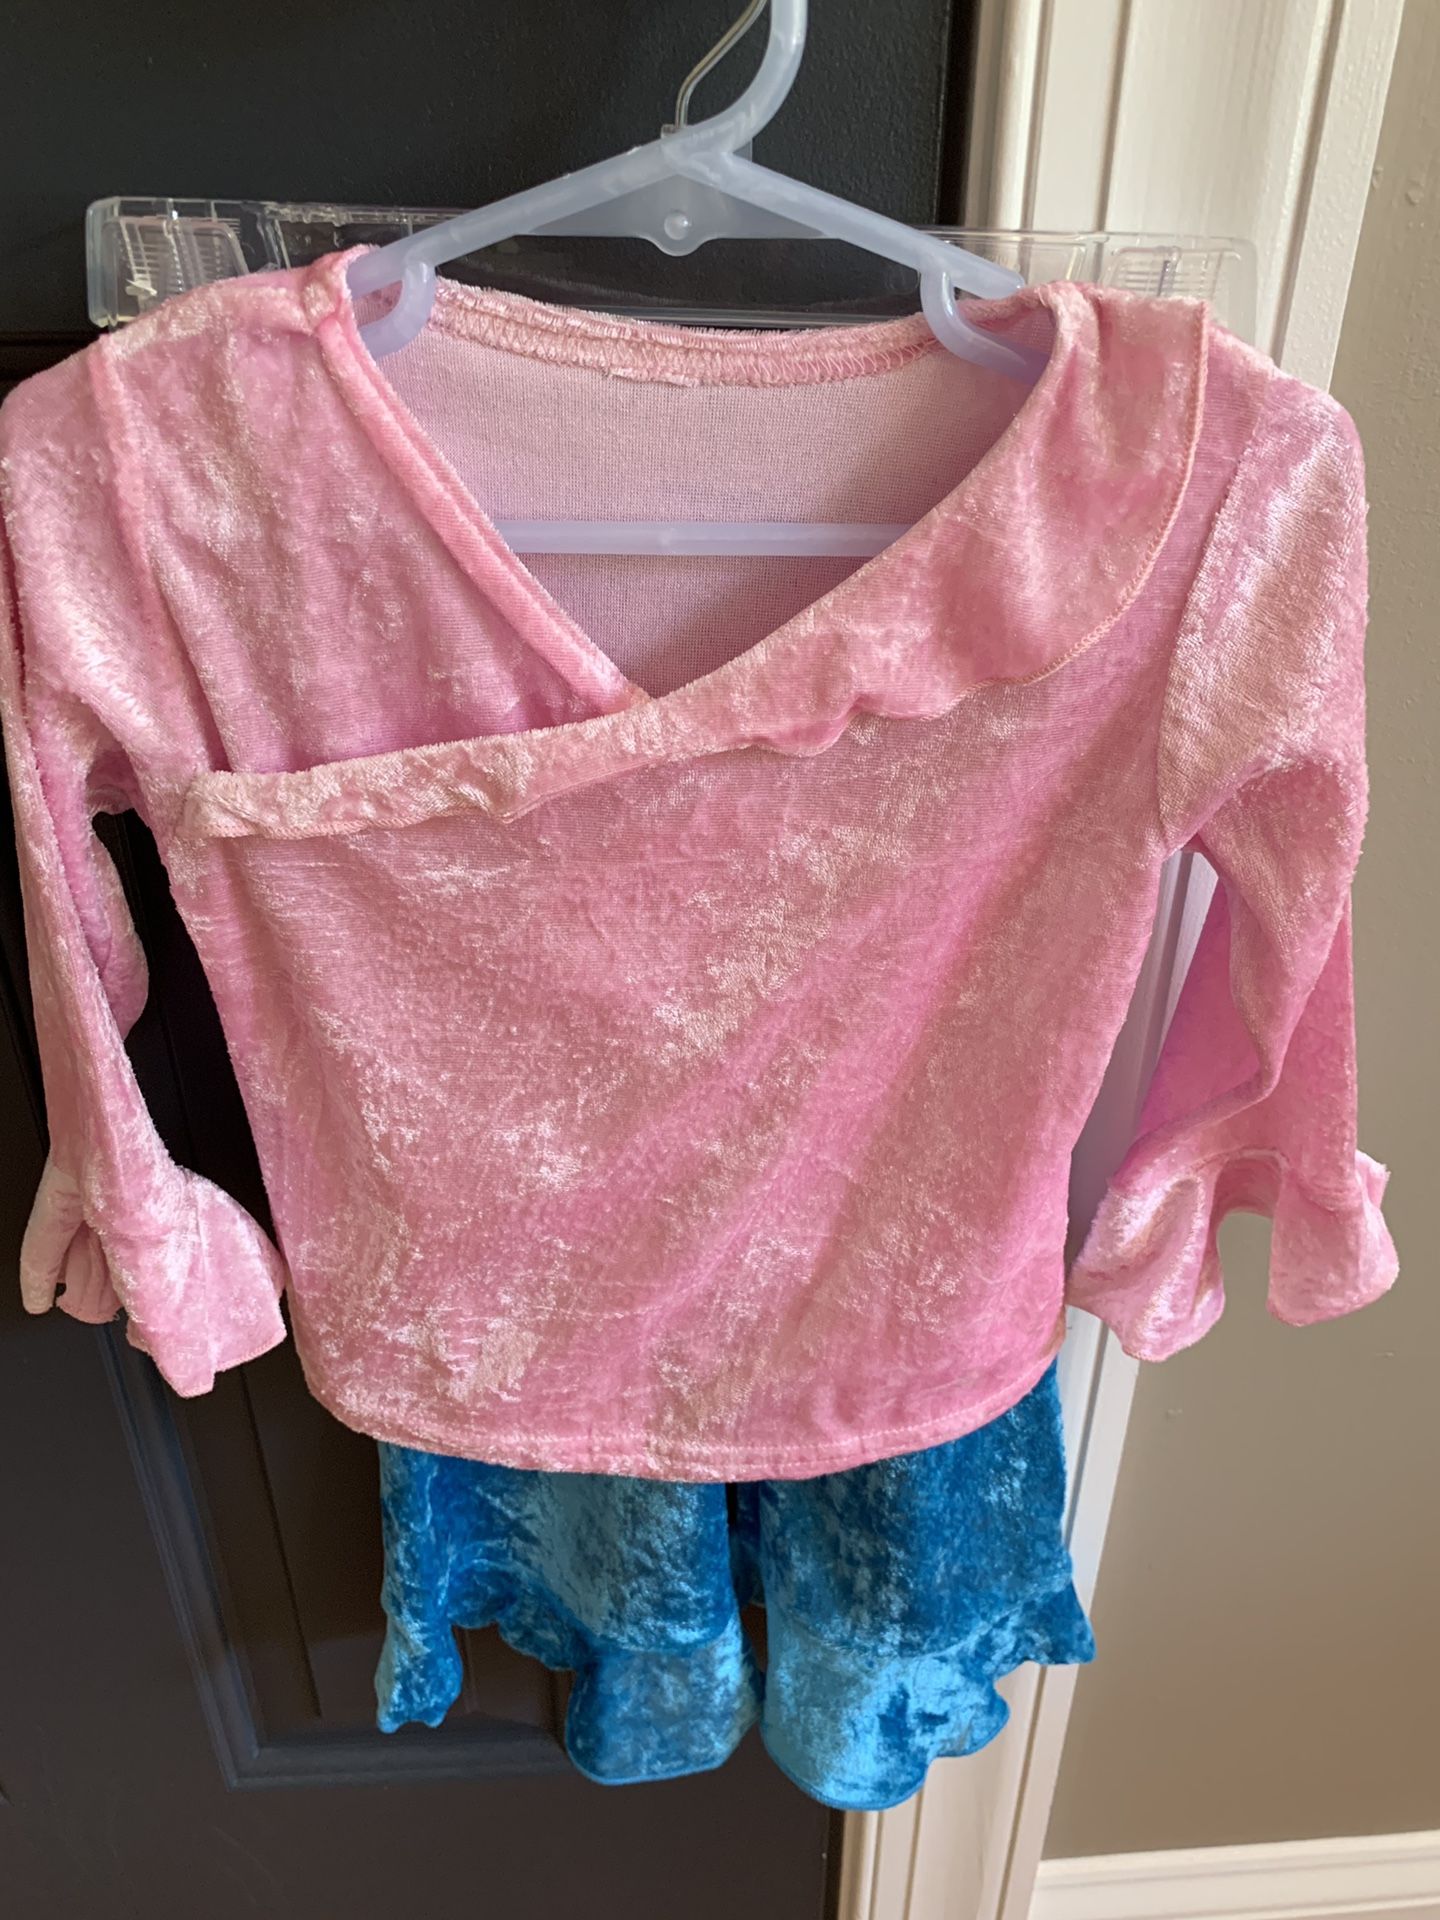 Girl size 2t pink and blue pajamas